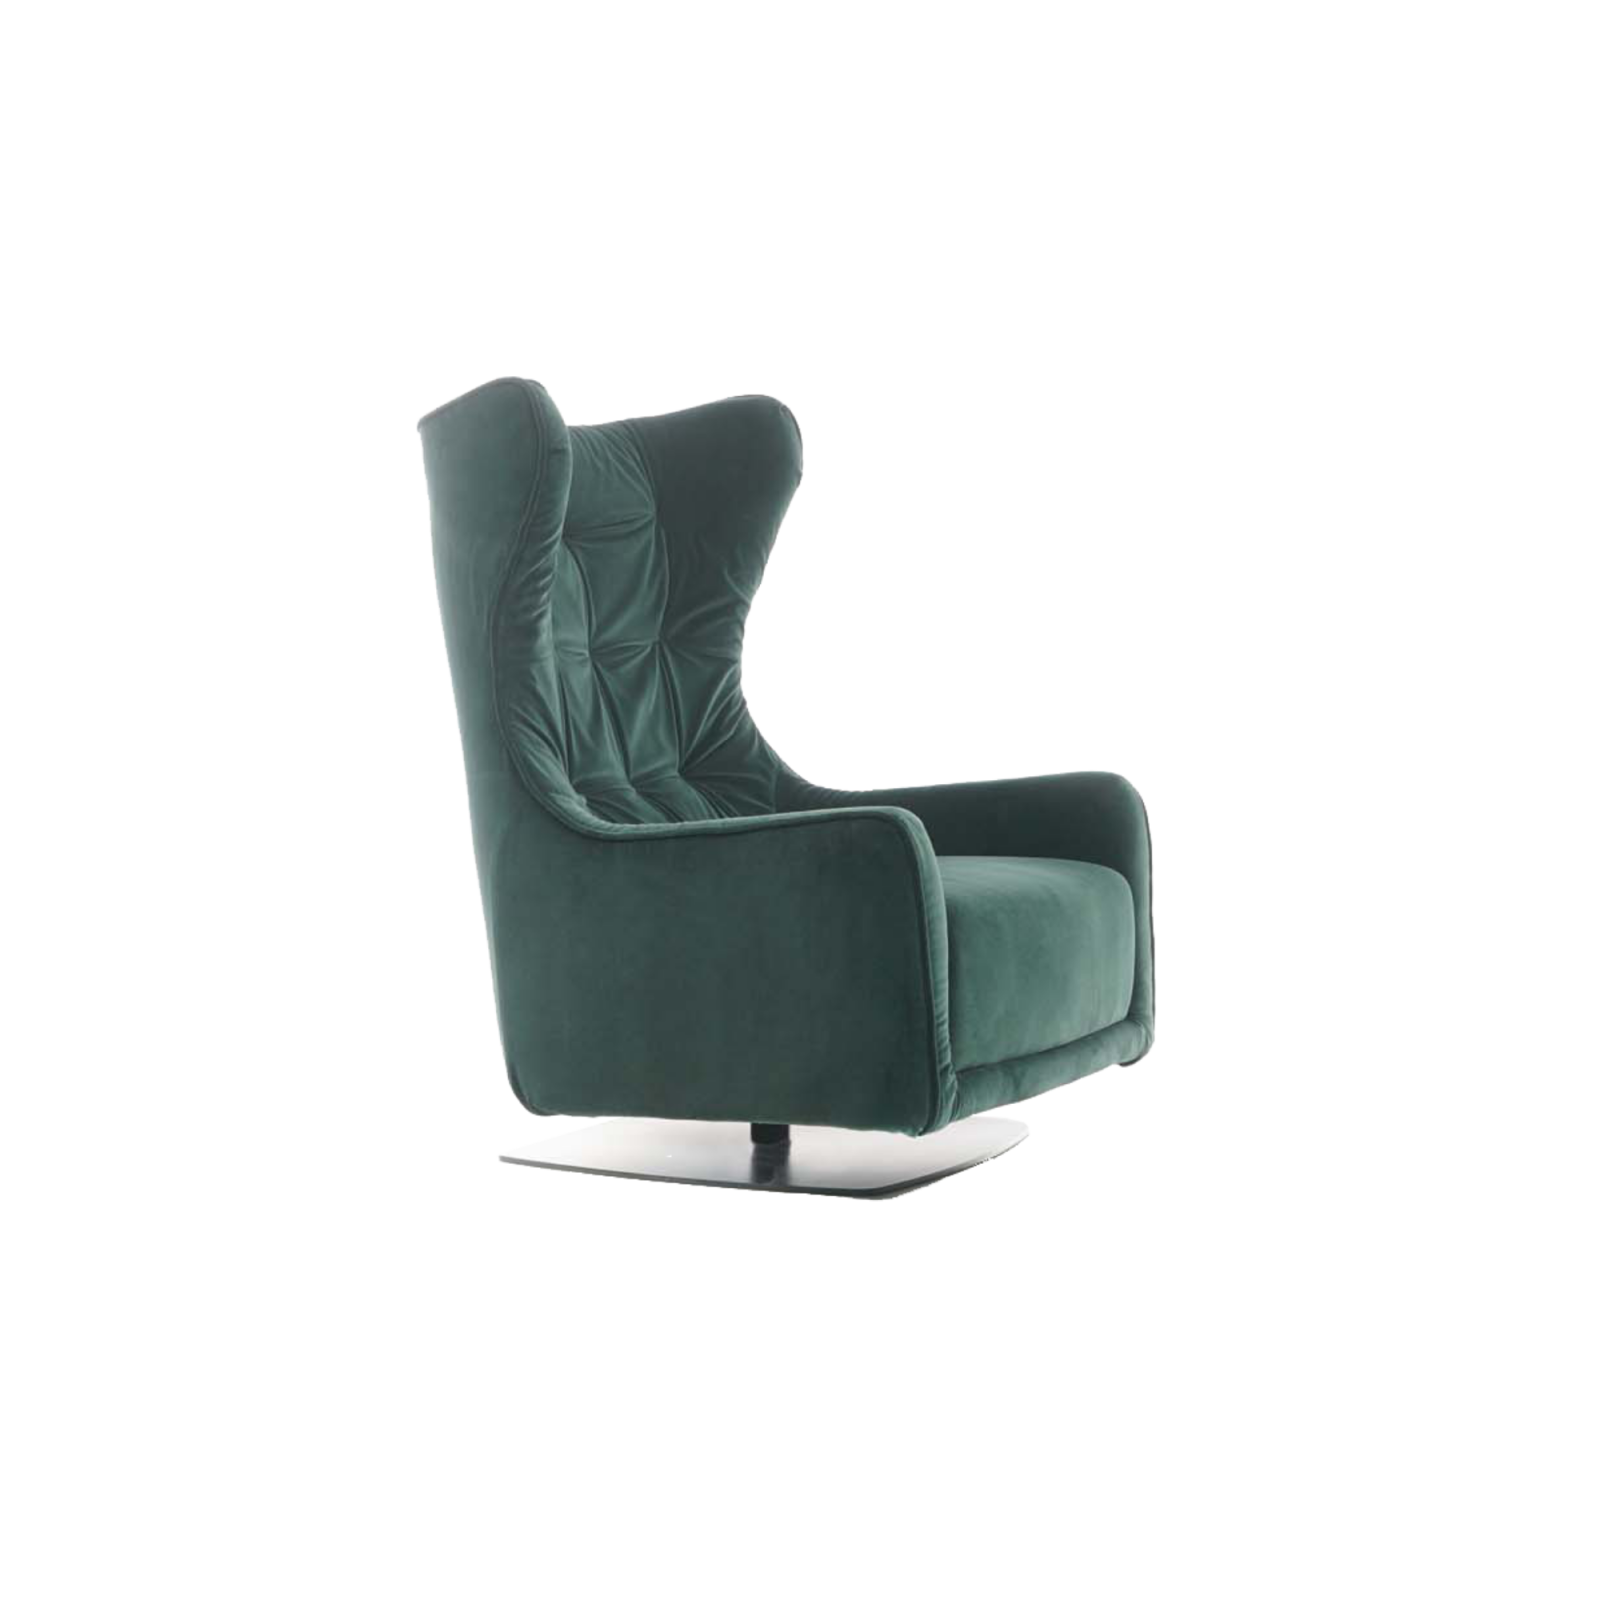 Green Tanka Armchair that sits gracefully on a slender foot